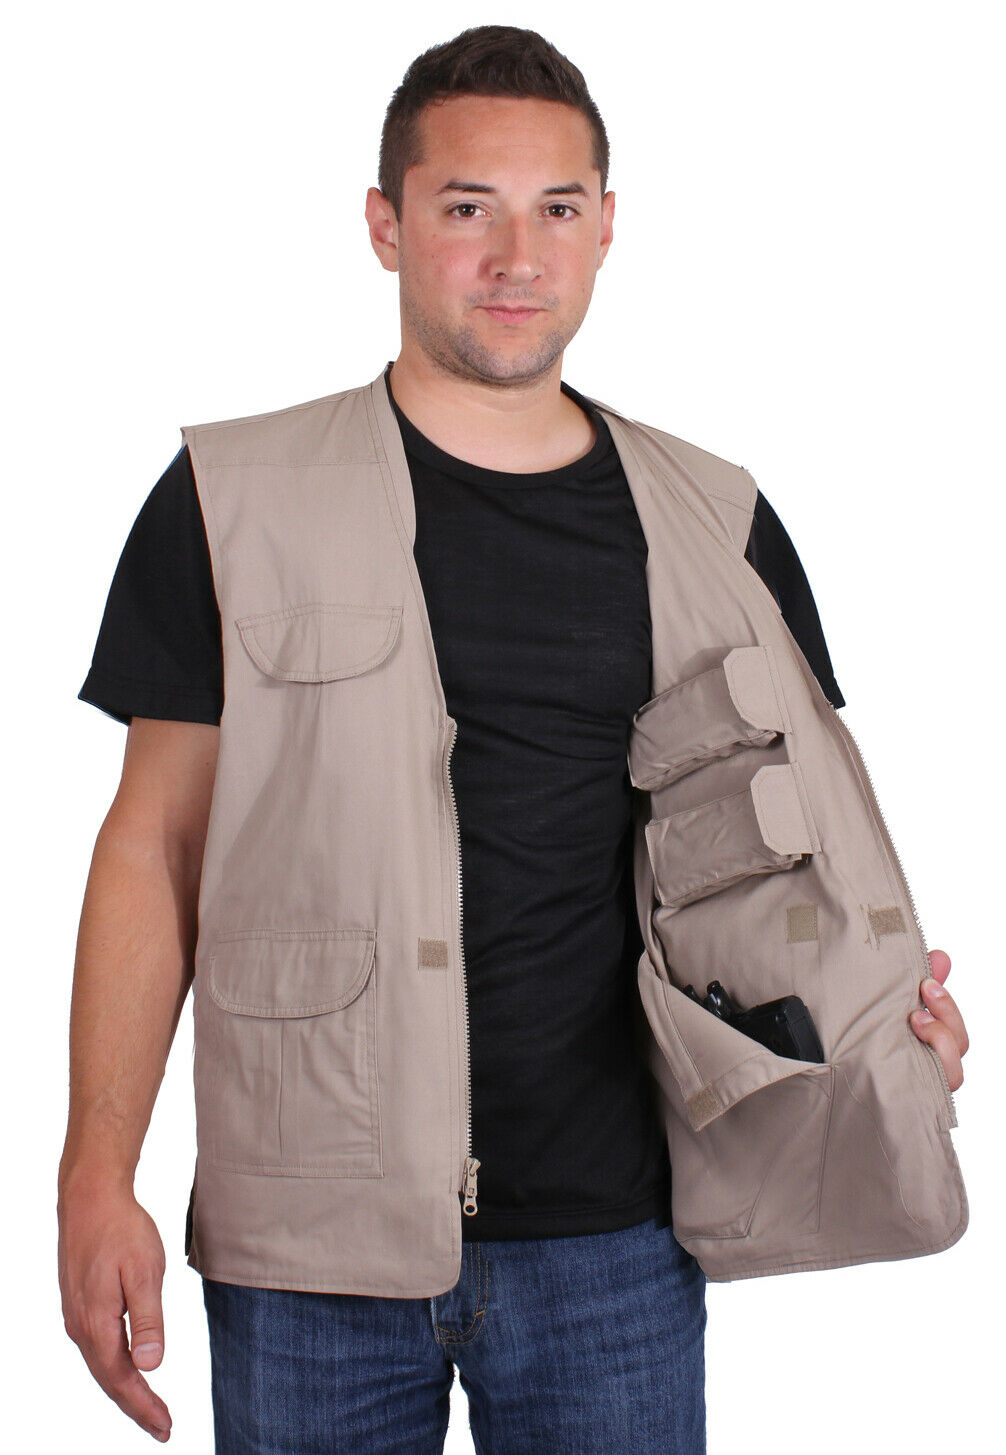 Rothco Lightweight Professional Concealed Carry Travel Vest